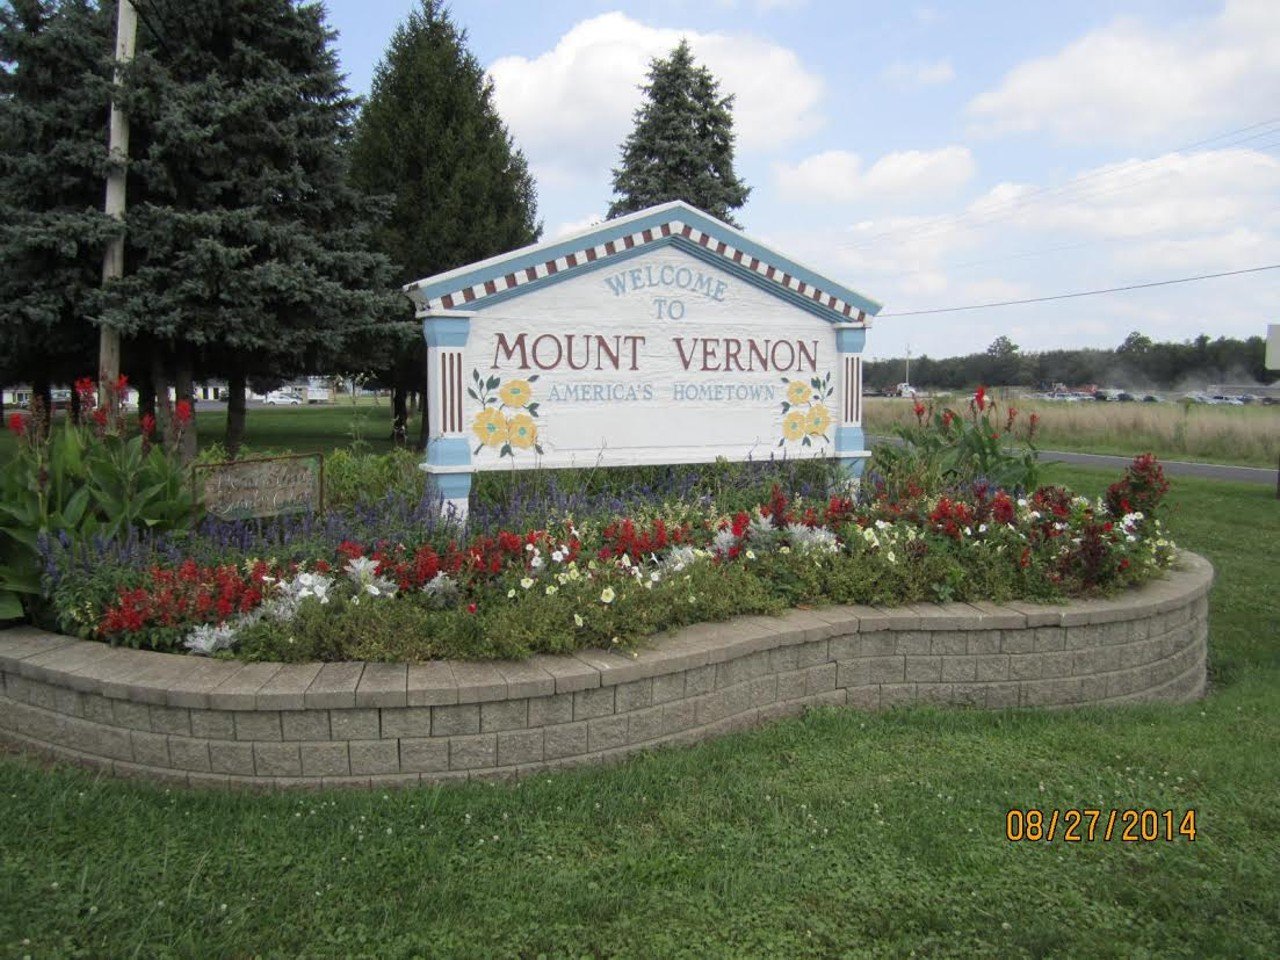 Mount Vernon, Ohio
Distance: 2.5 hours
Mt. Vernon was voted Best Hometown 2017-2018 by Ohio Magazine, and by taking a walk through the well-preserved downtown area, you'll see why. With its green parks and classical buildings, there's a lot to explore in Mt. Vernon. You can camp near and canoe the Kokosing River or check out the oldest opera theatre in the nation, the Woodward Opera House.